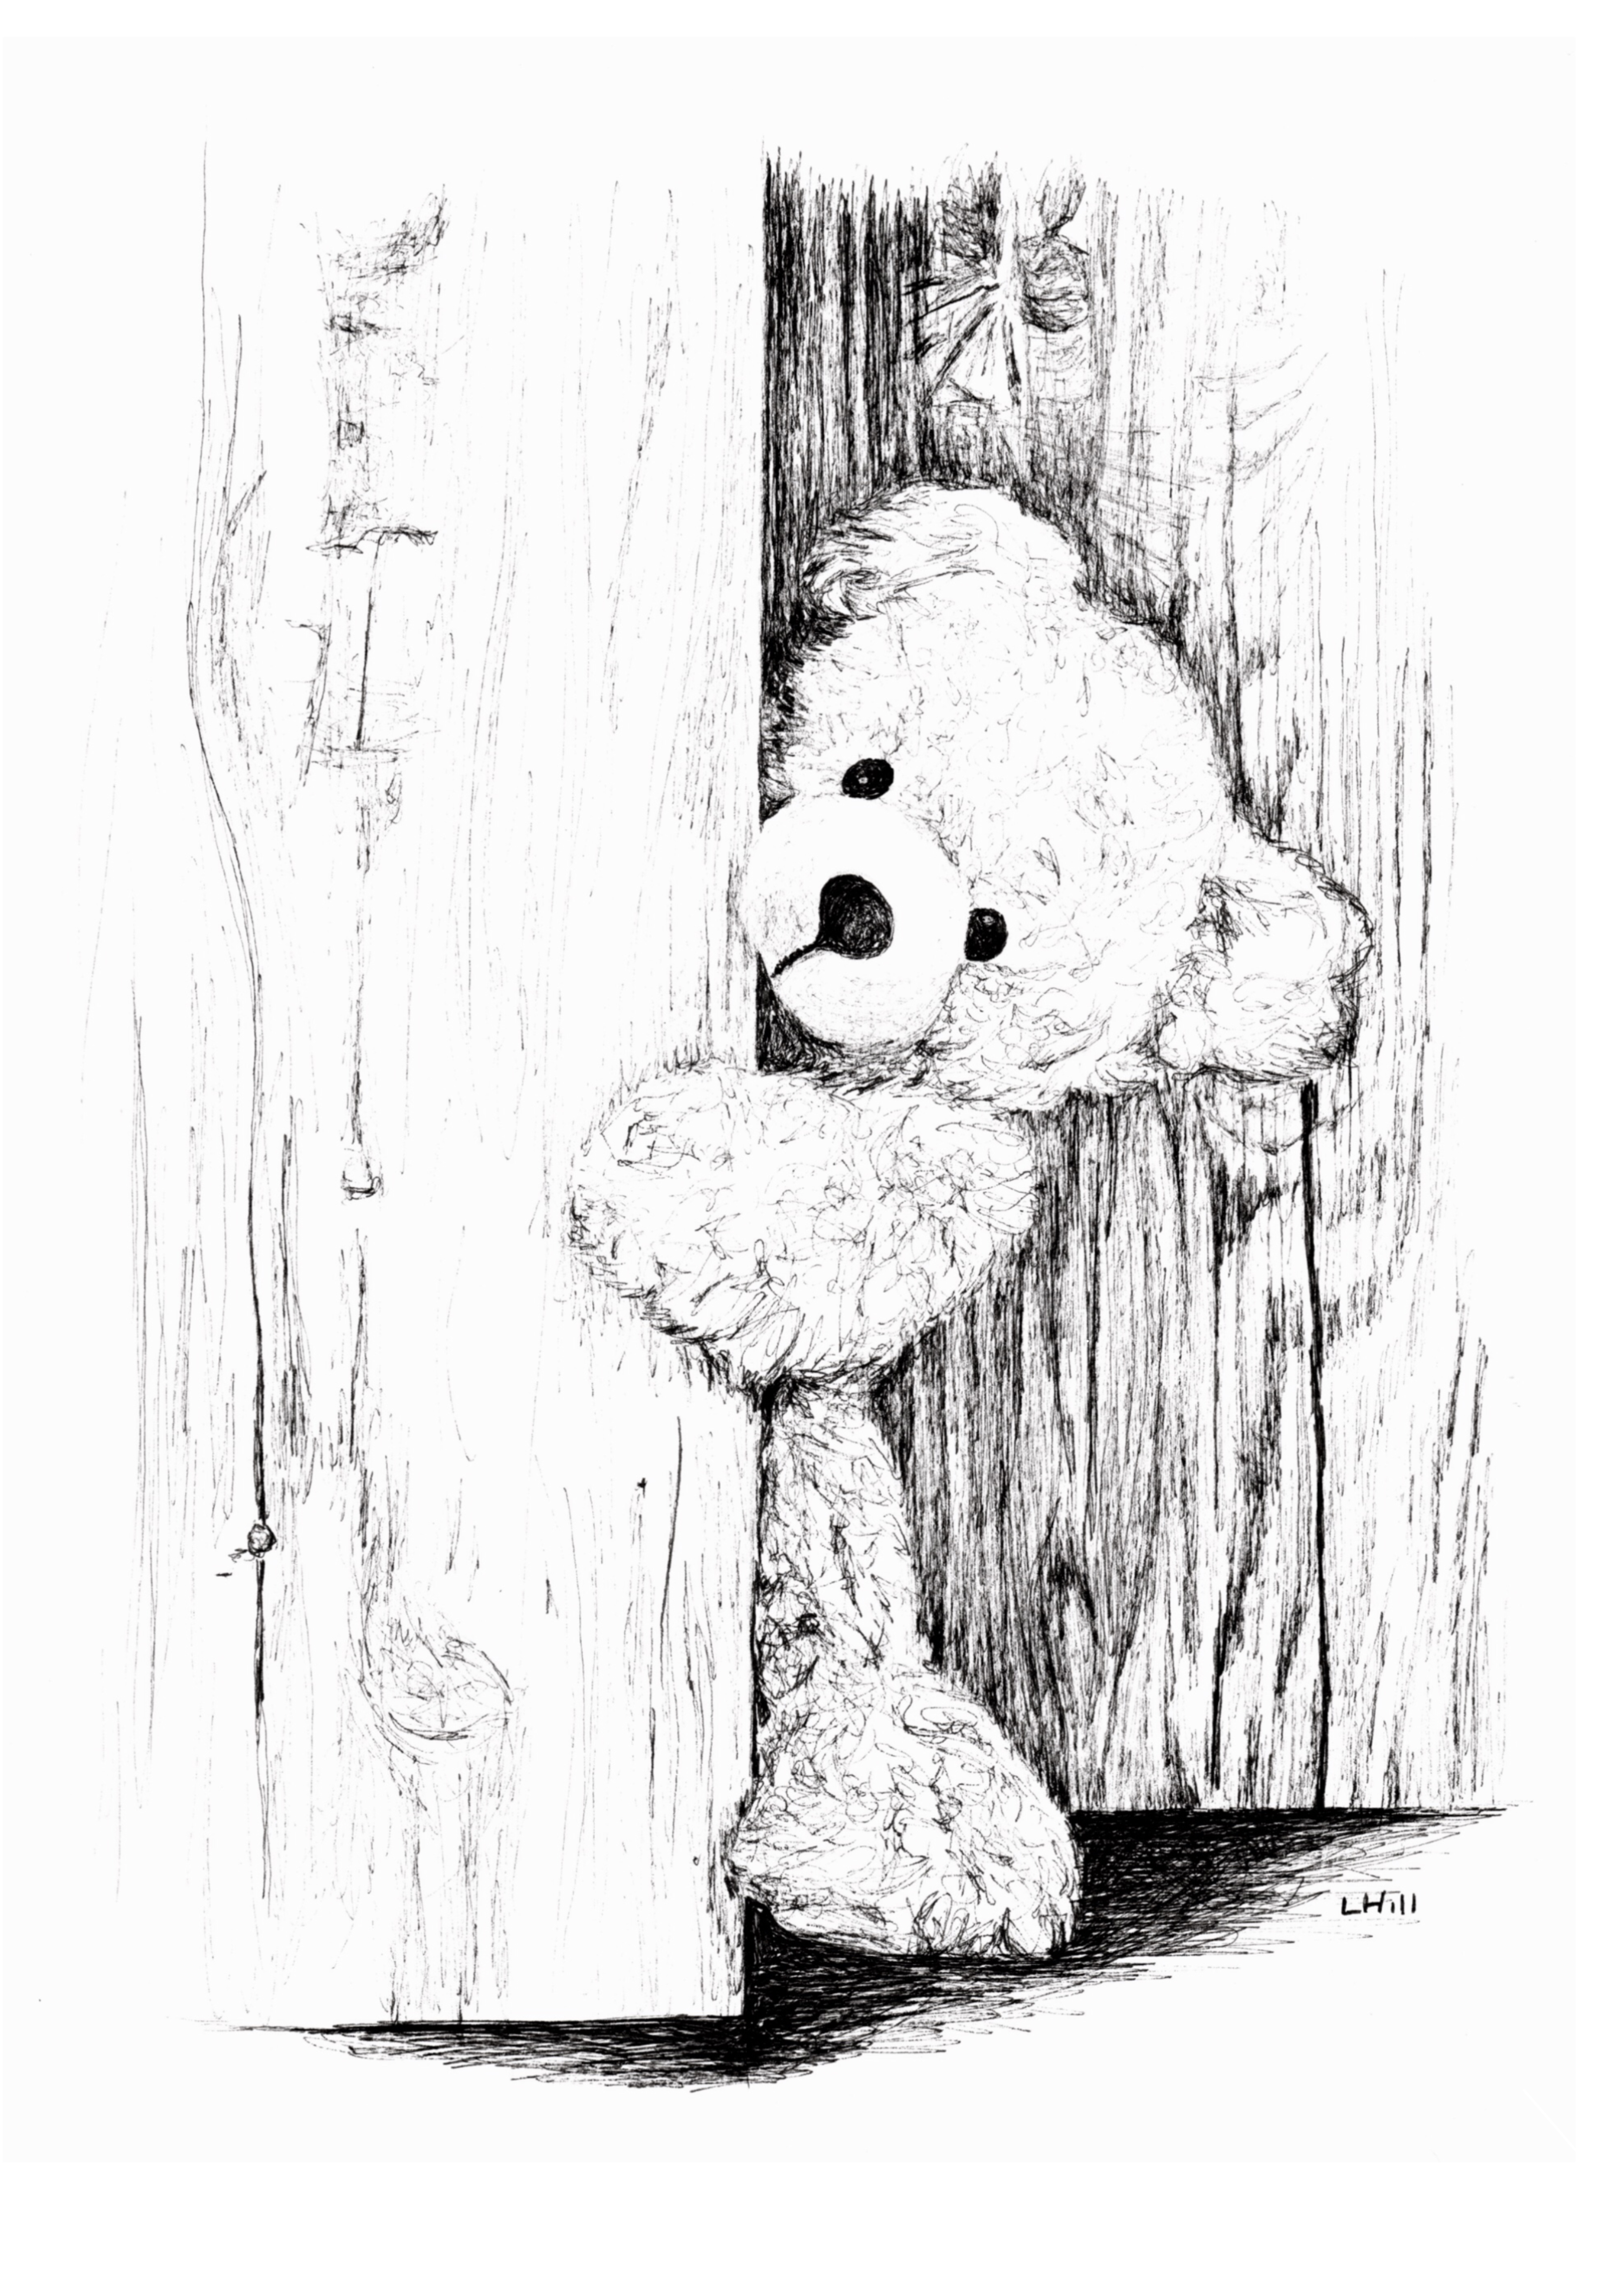 Teddy pen and ink illustration by Louisa Hill